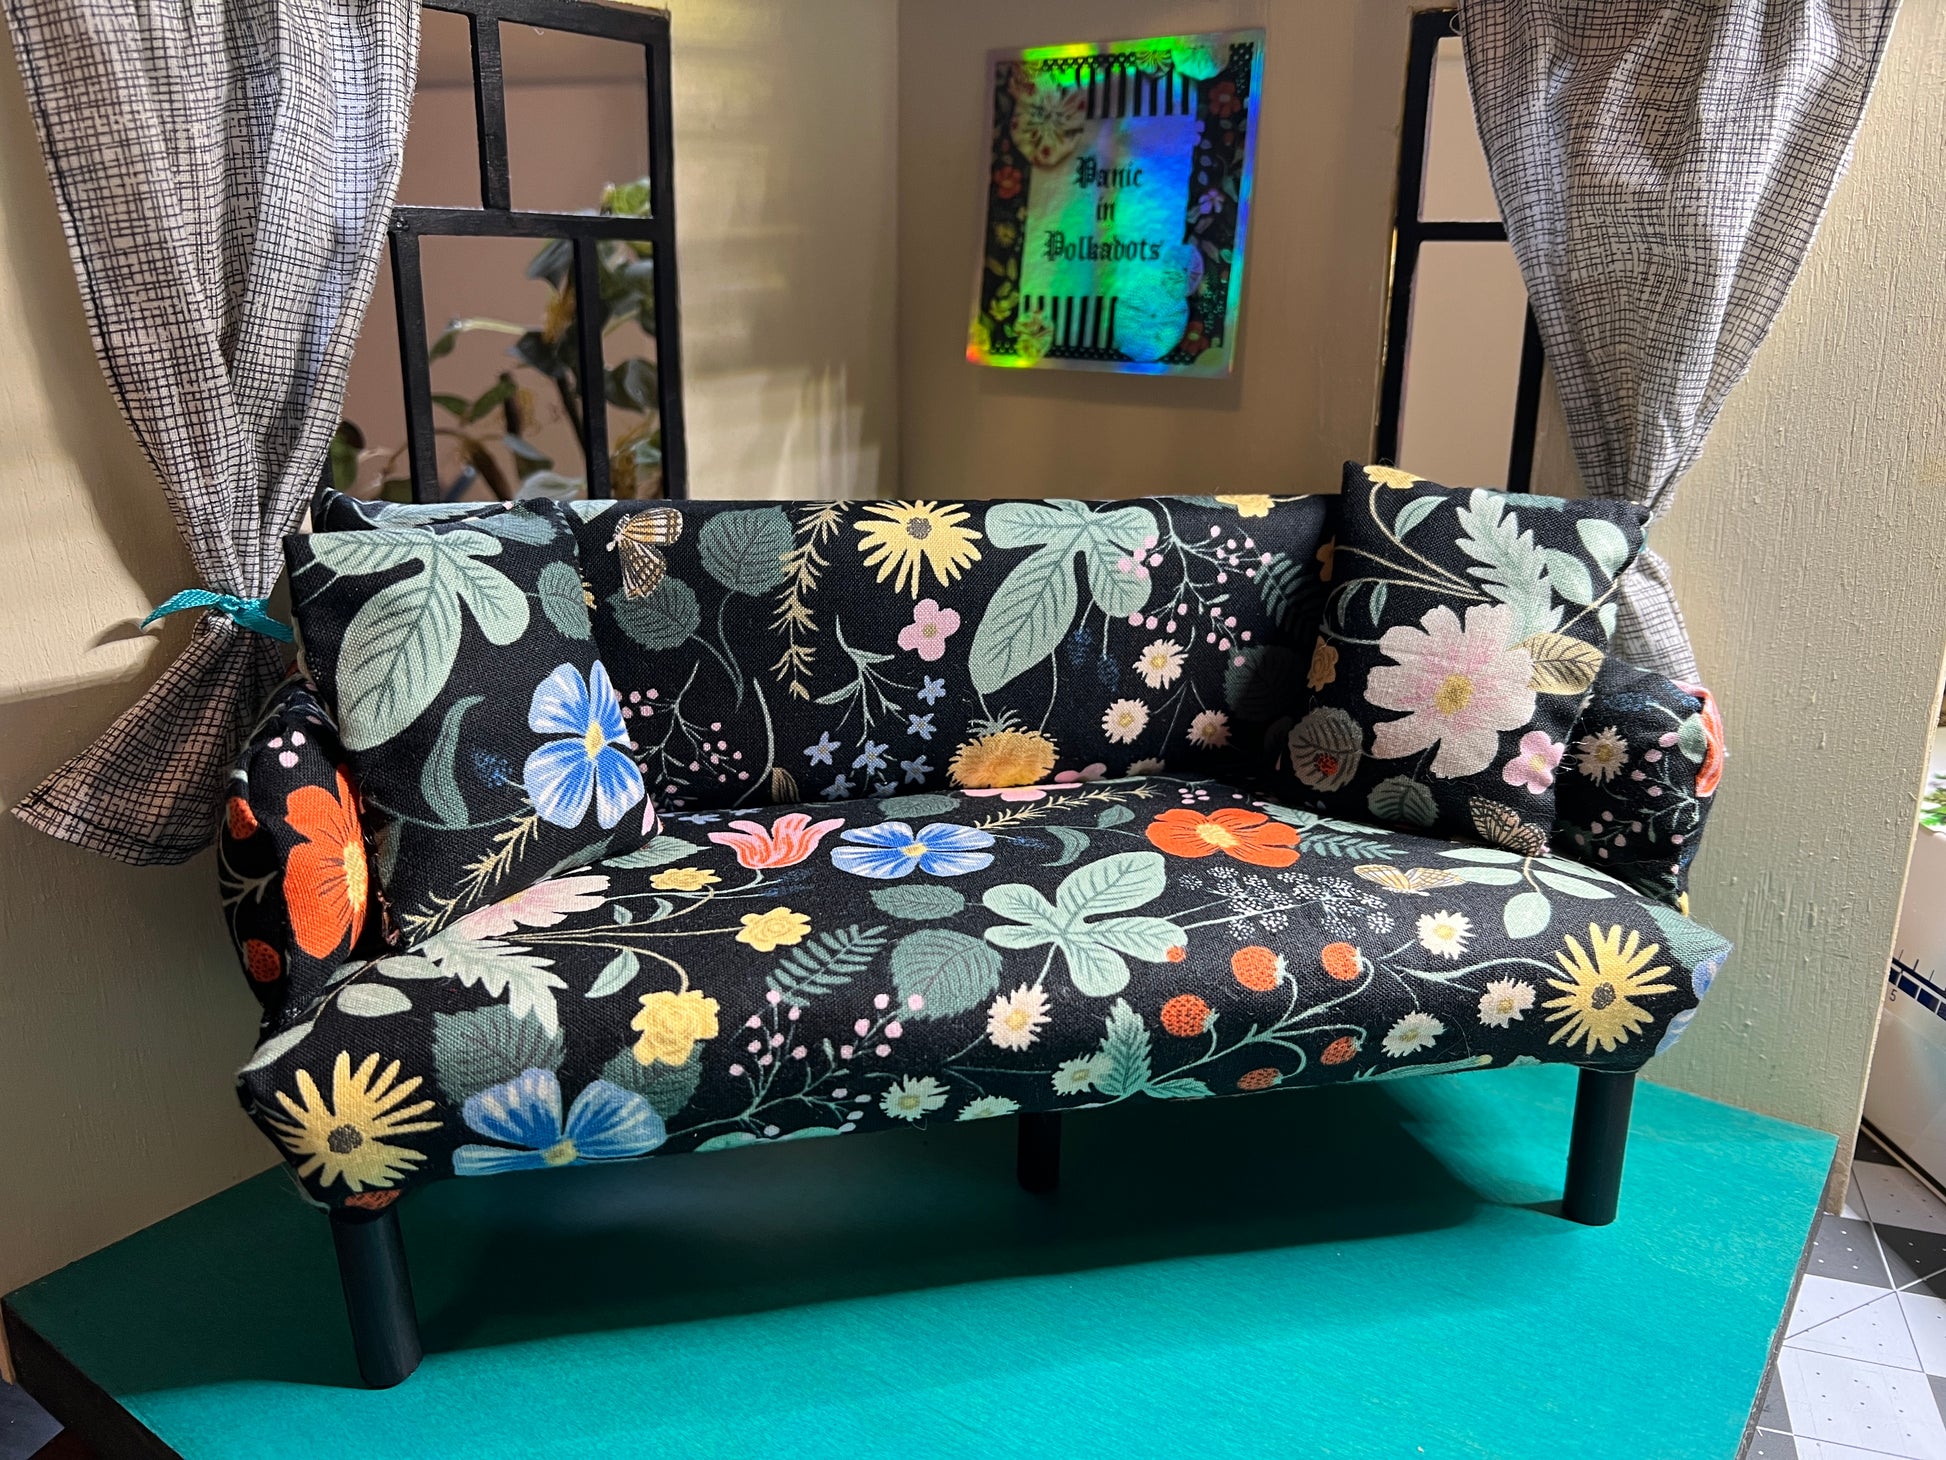 handmade Barbie doll couch, in a dollhouse setting for scale, includes two pillows by Panic in Polkadots. Bold floral fabric in peach, orange, blue, yellow, greenery, and black background